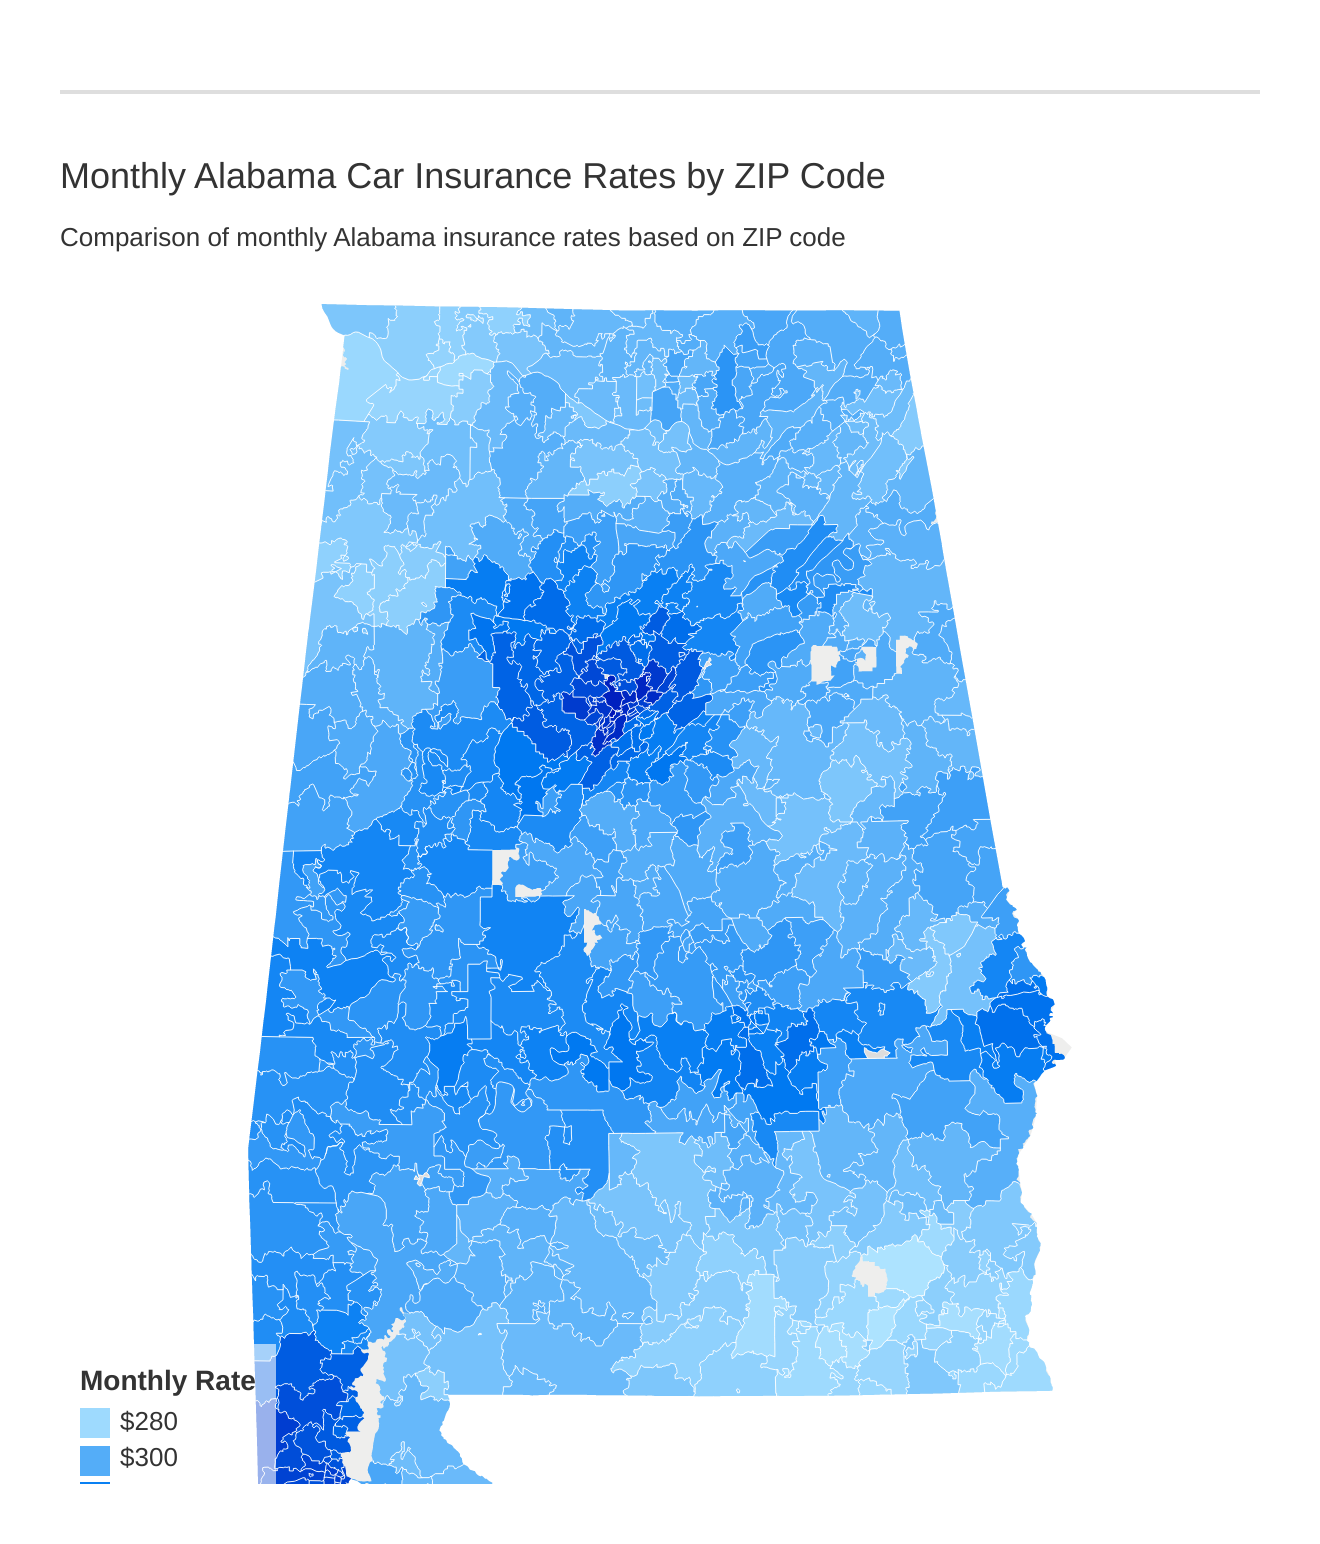 Monthly Alabama Car Insurance Rates by ZIP Code